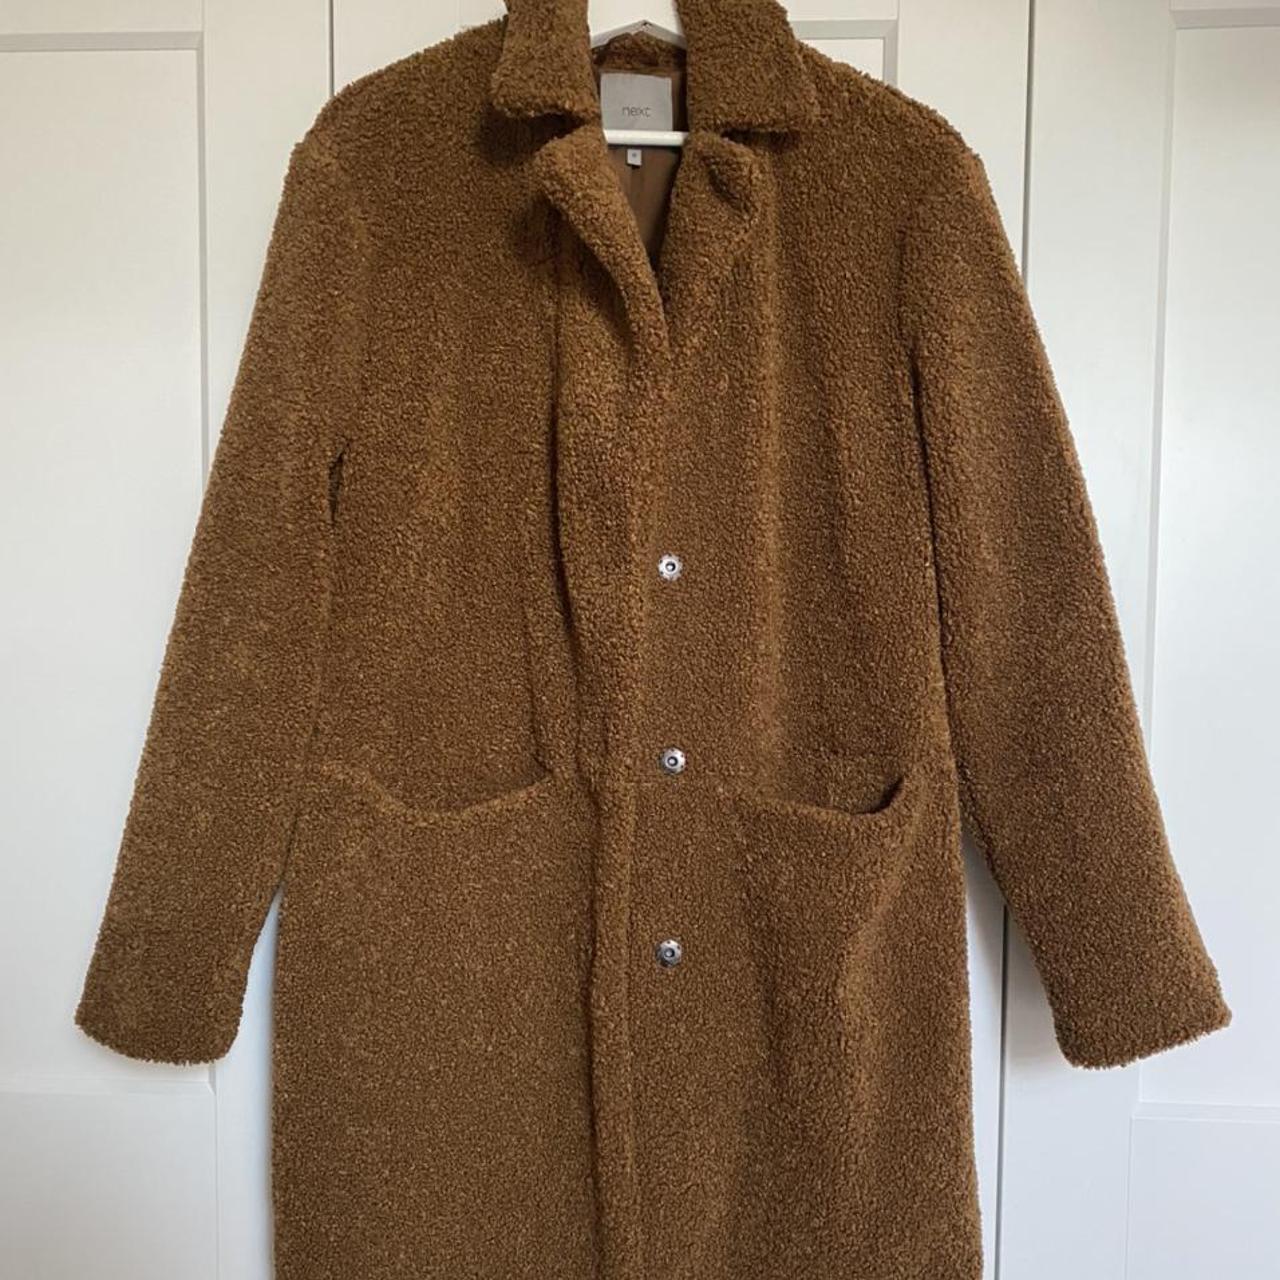 Product Image 1 - Next teddy coat. Perfect condition.